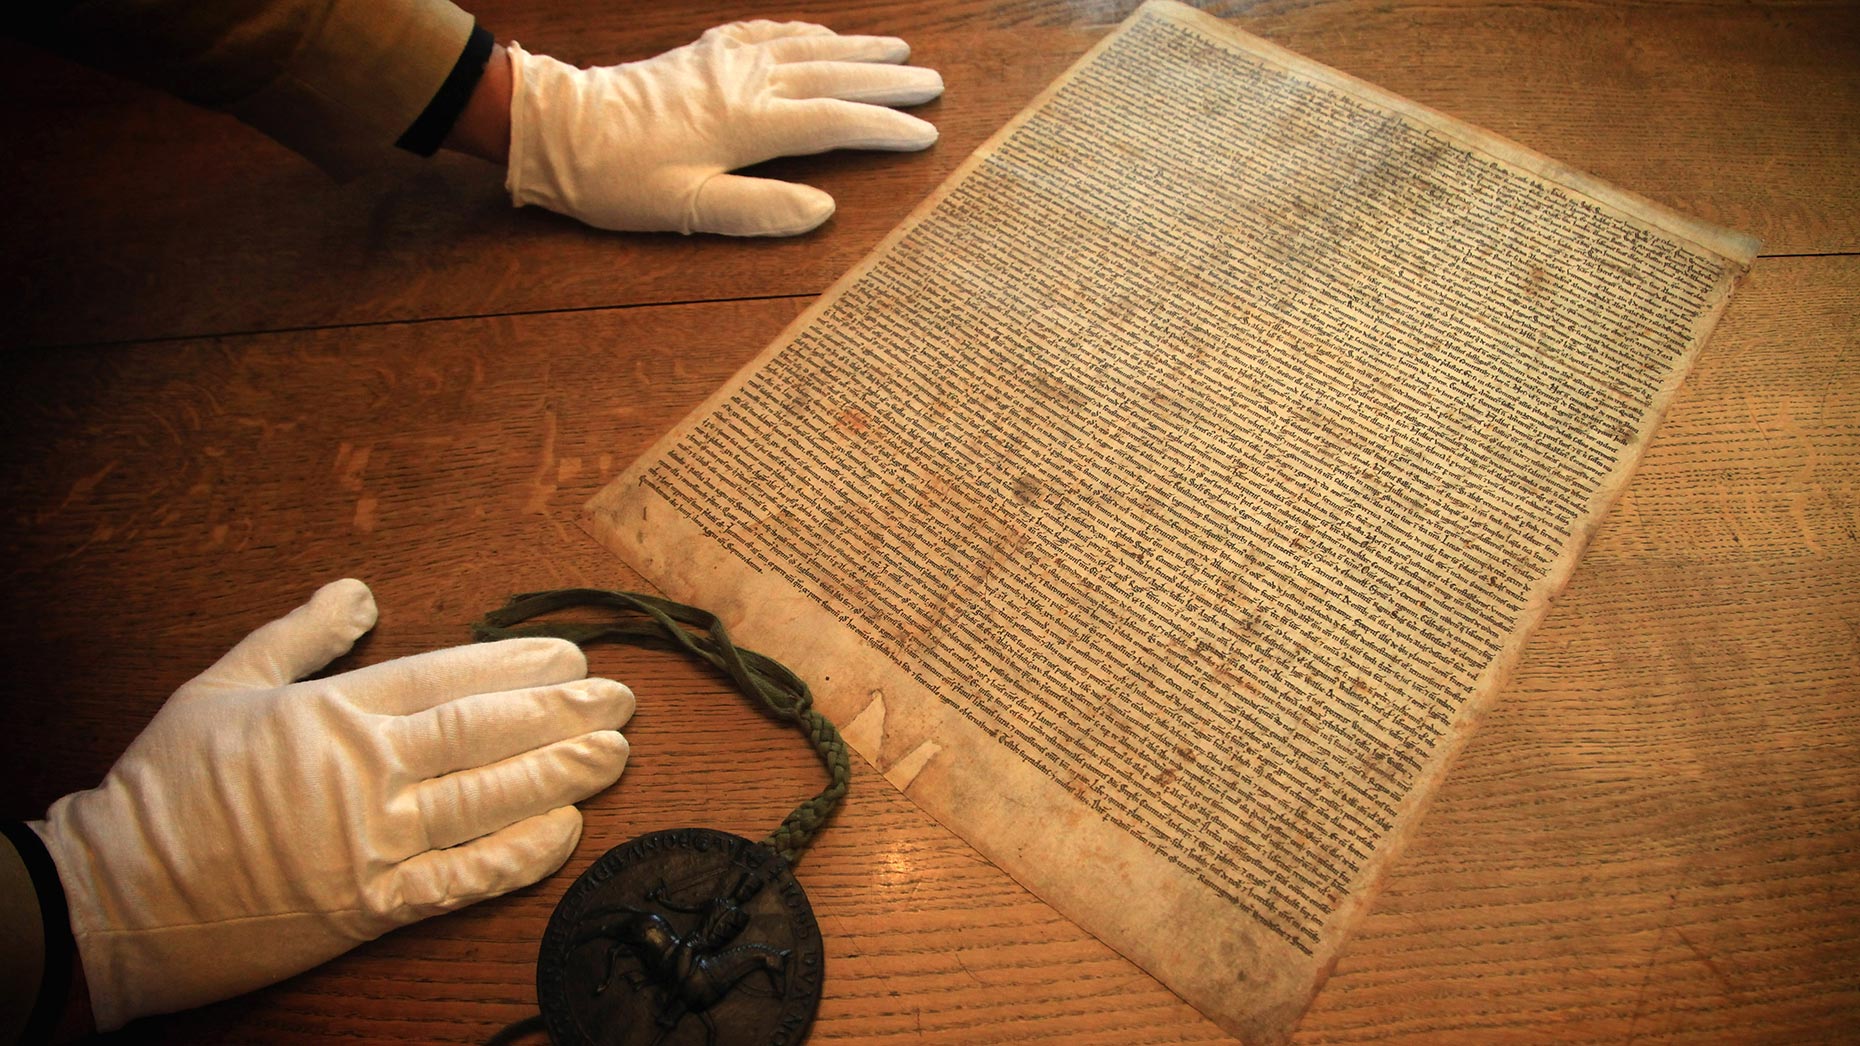 Magna Carta on its US tour in 2014. Image: Getty